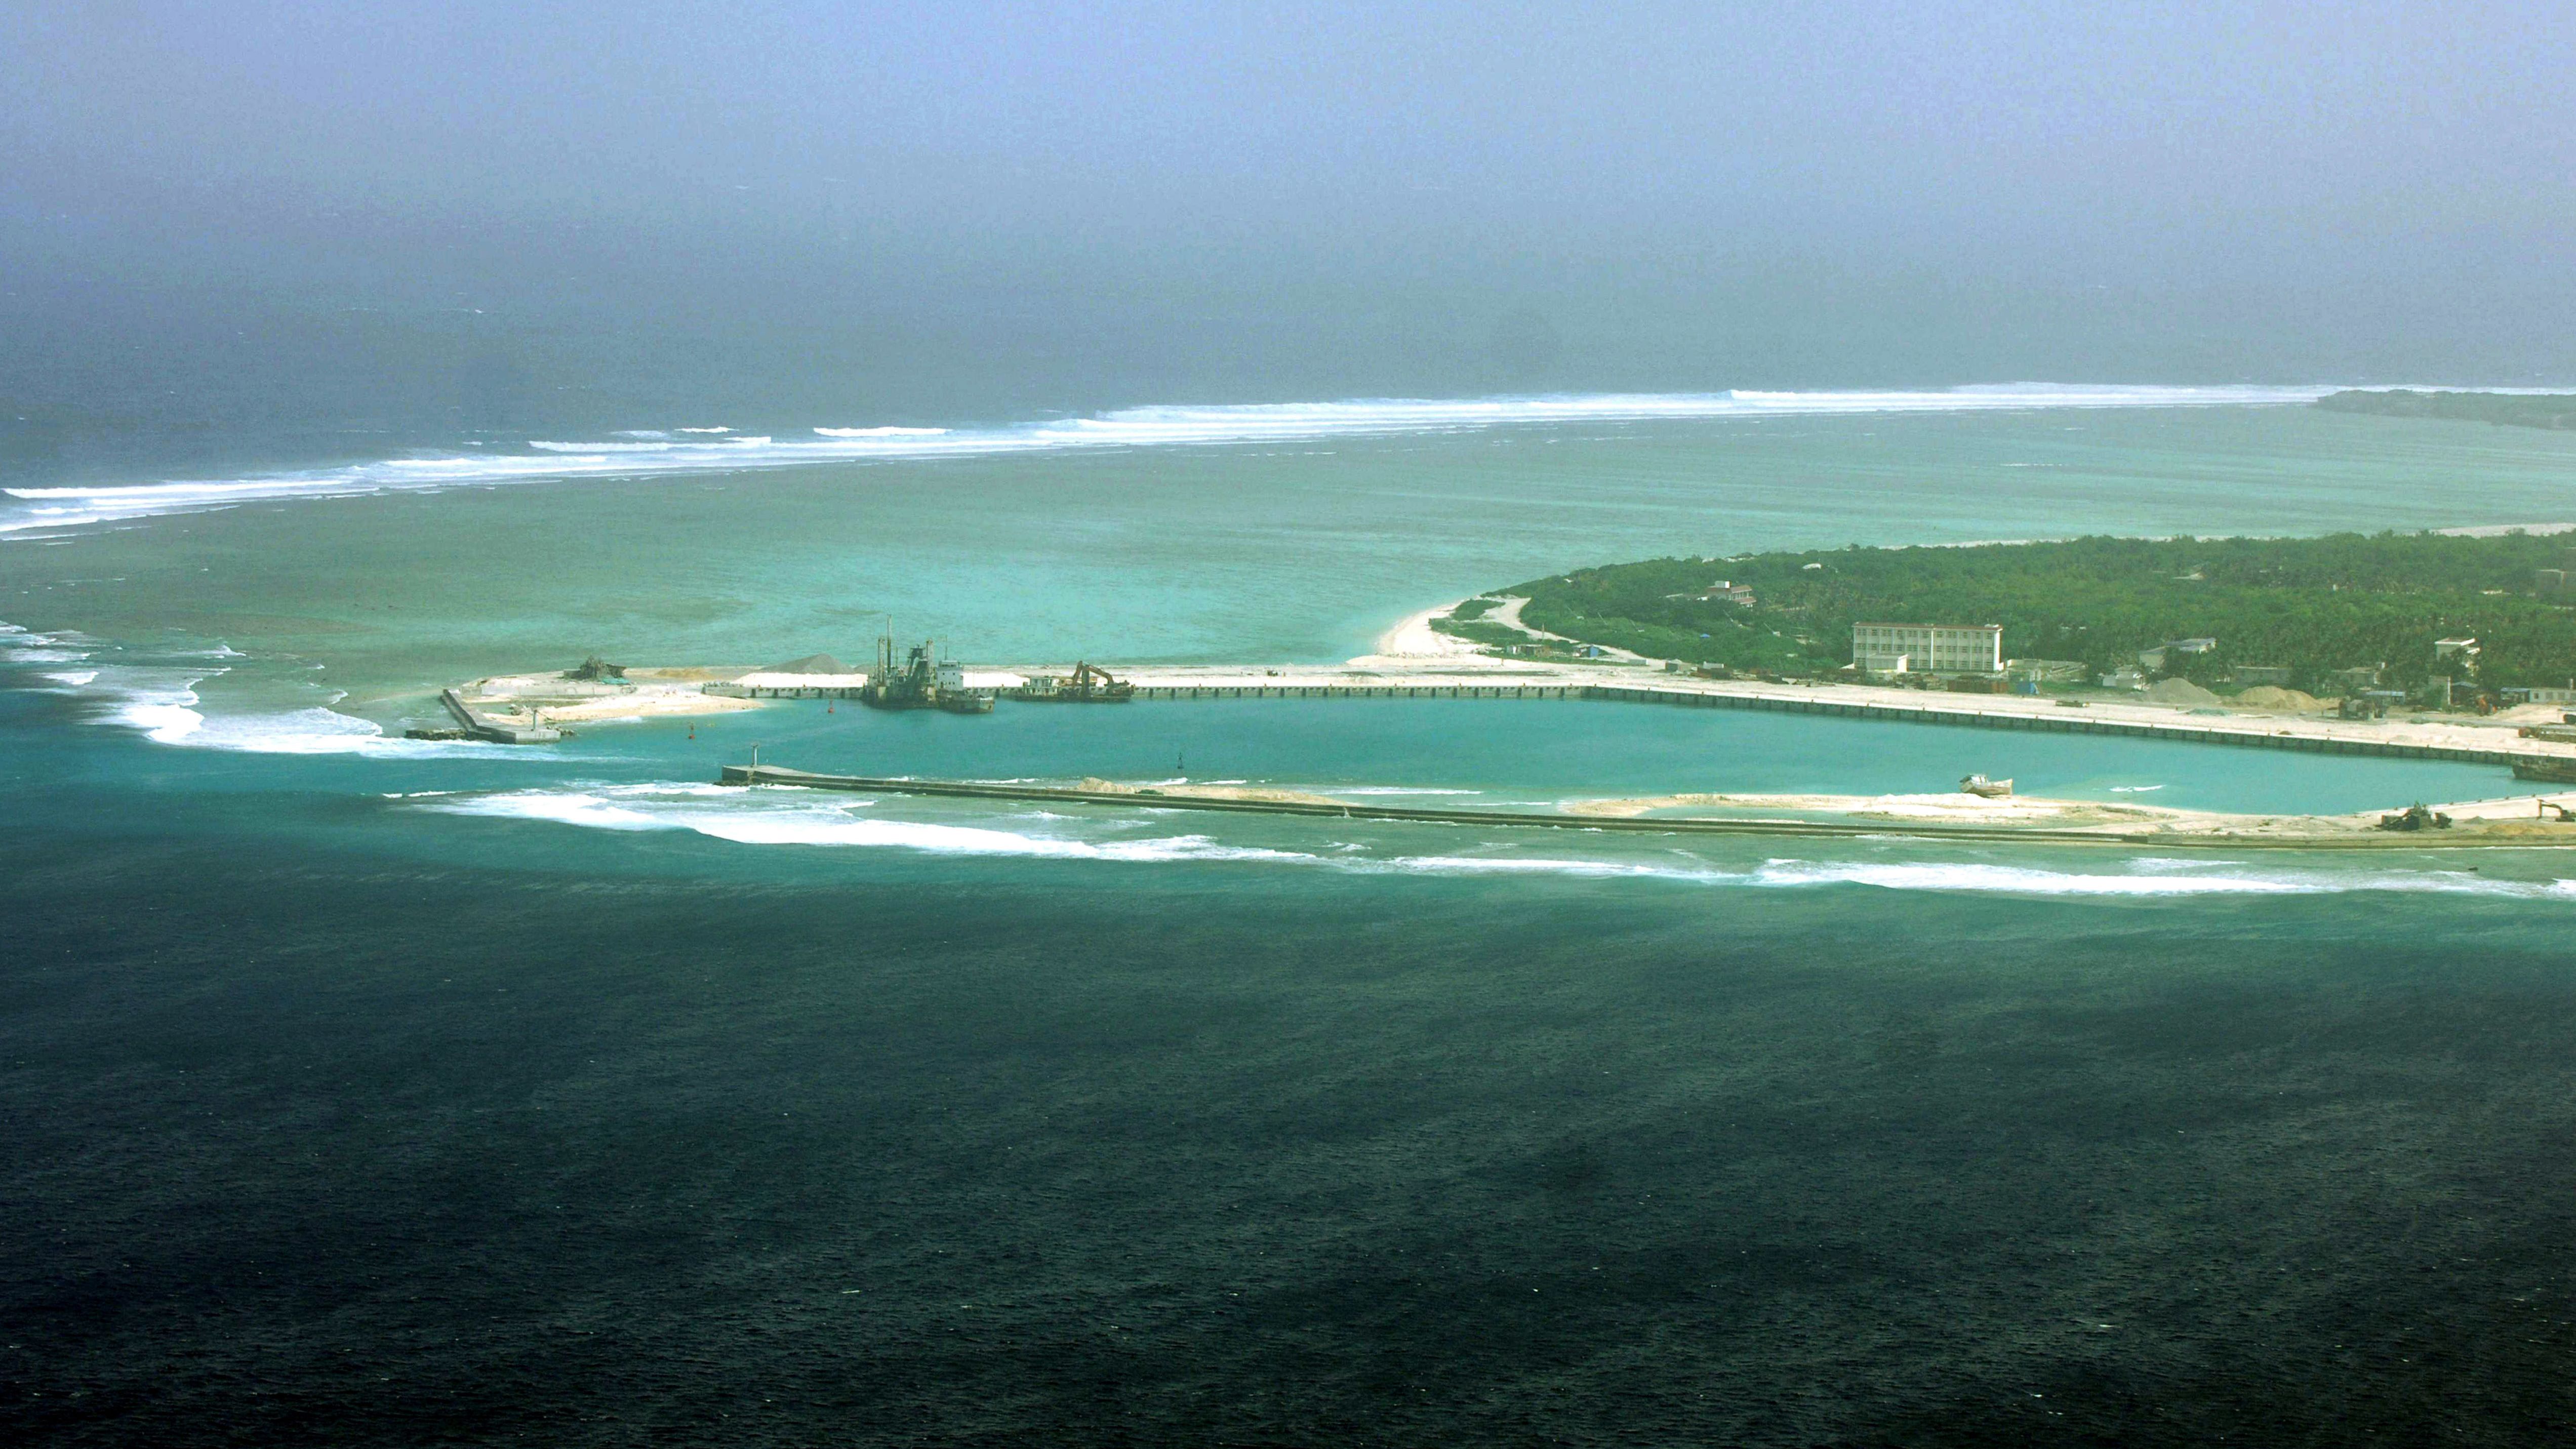 China claims the Paracel island group (pictured) in the South China Sea.